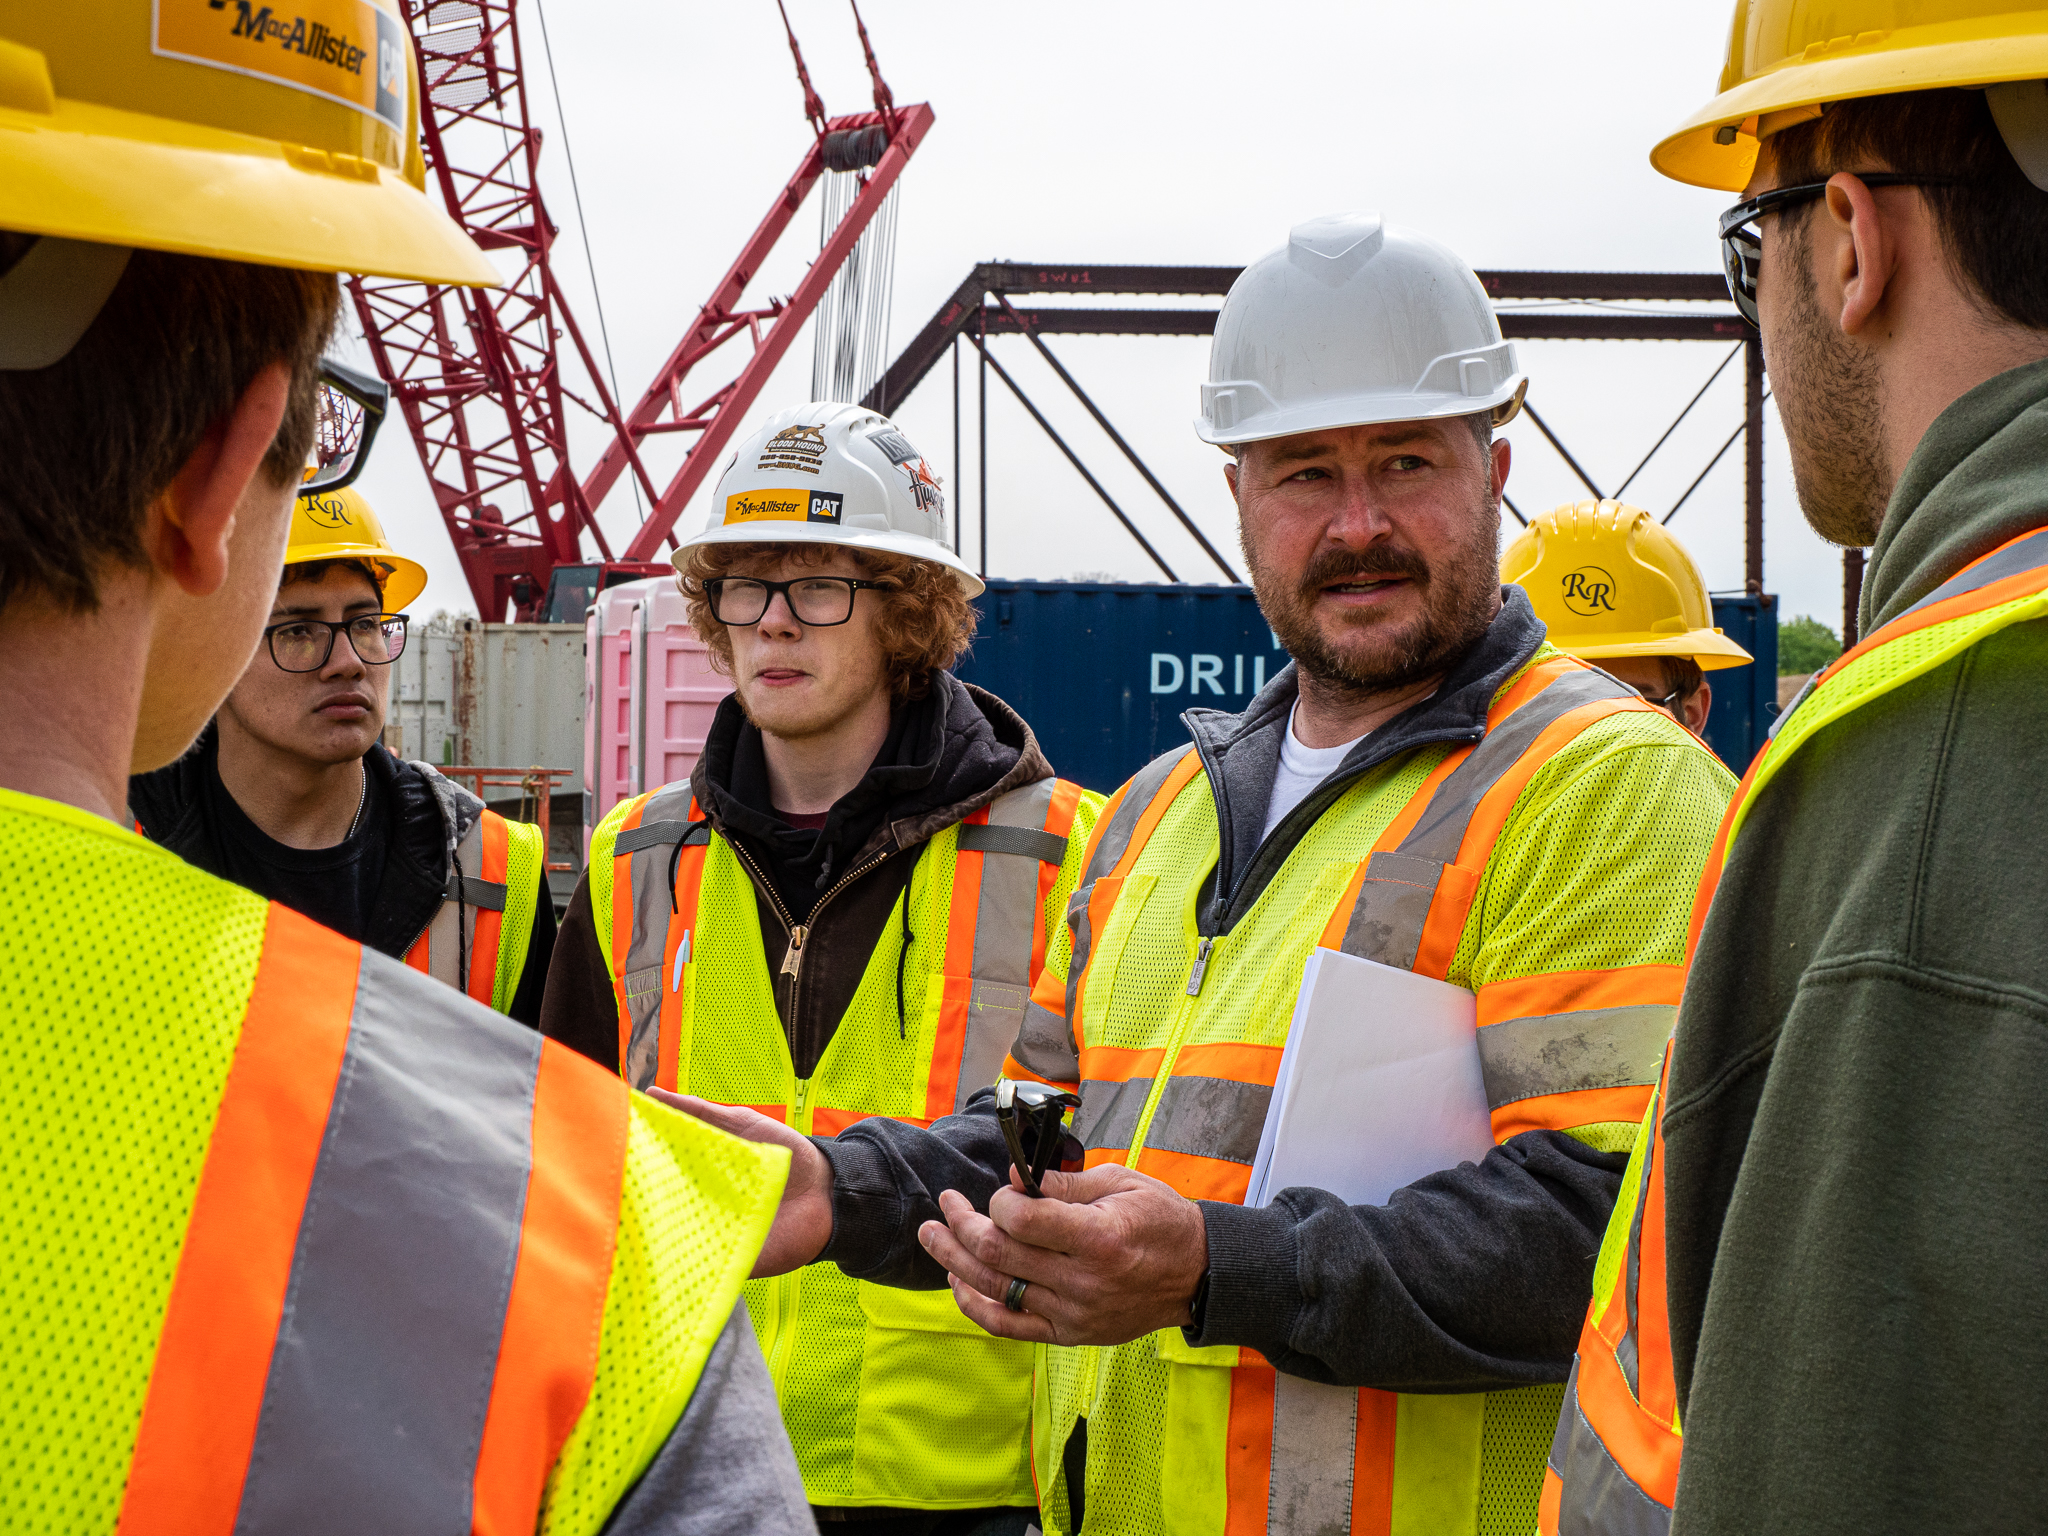 Careers for Adults Needing a Change: Why Civil Construction